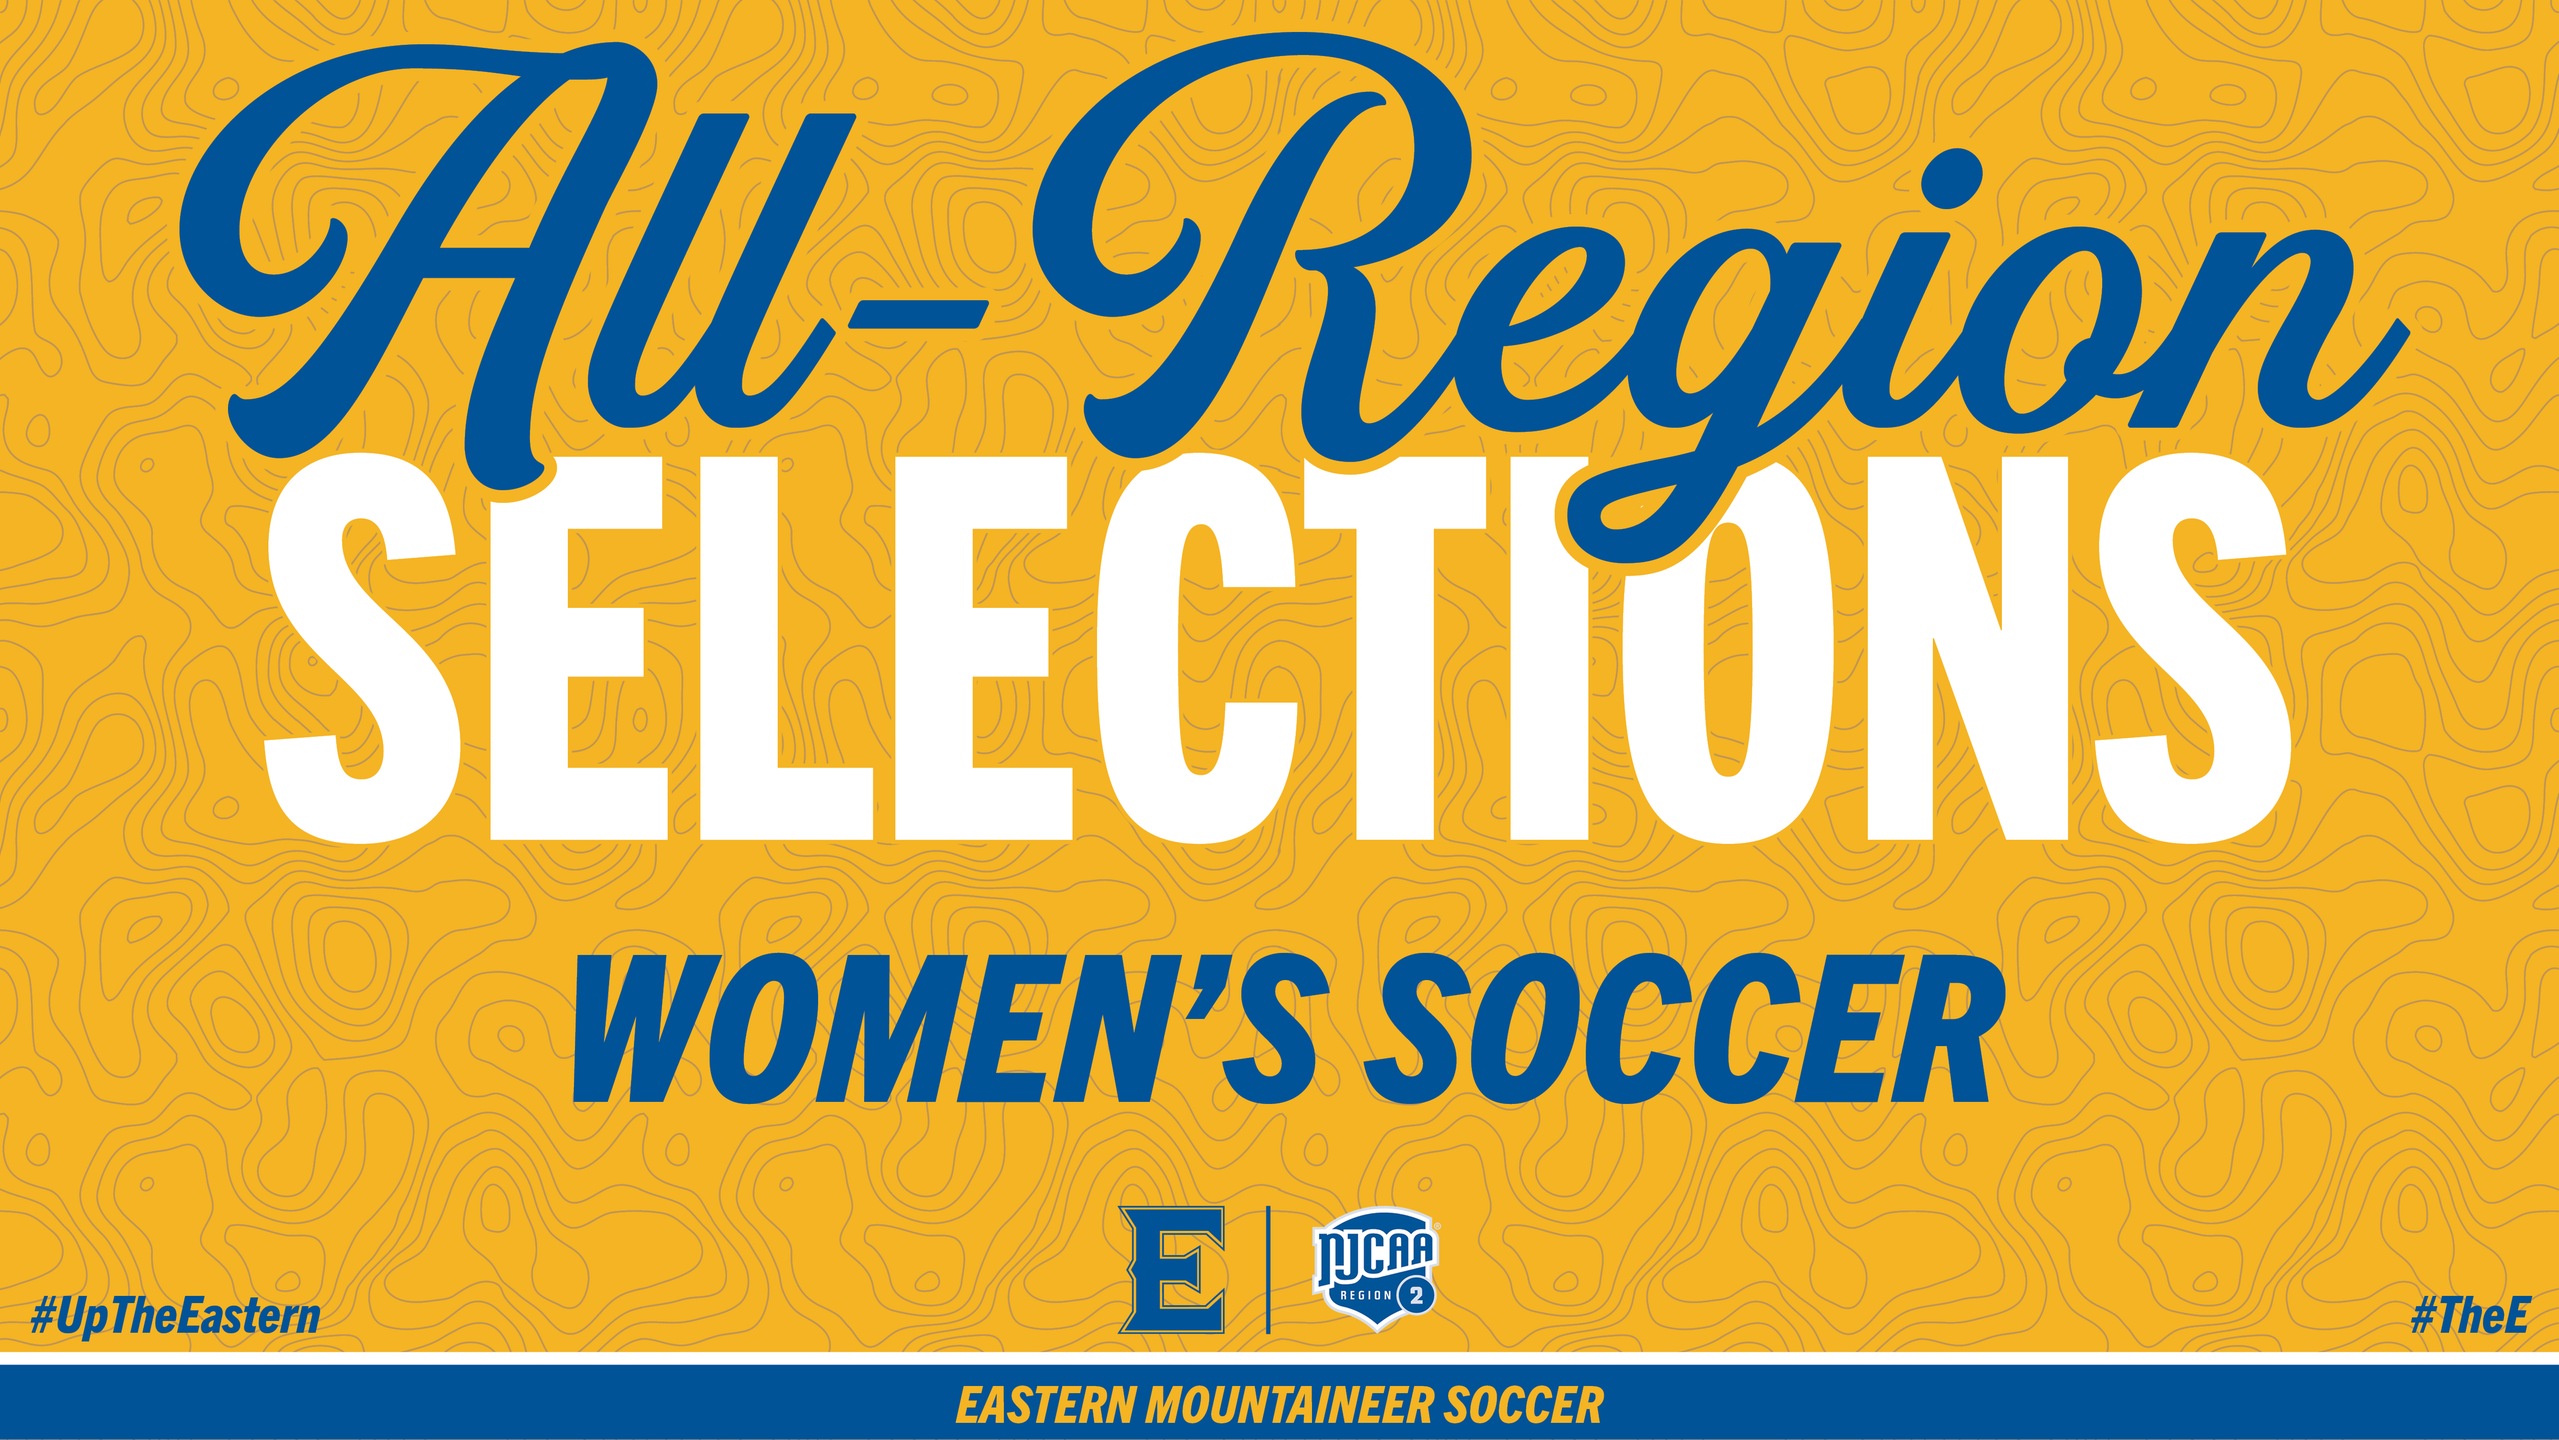 Four Women's Soccer Players Named to All-Region Teams